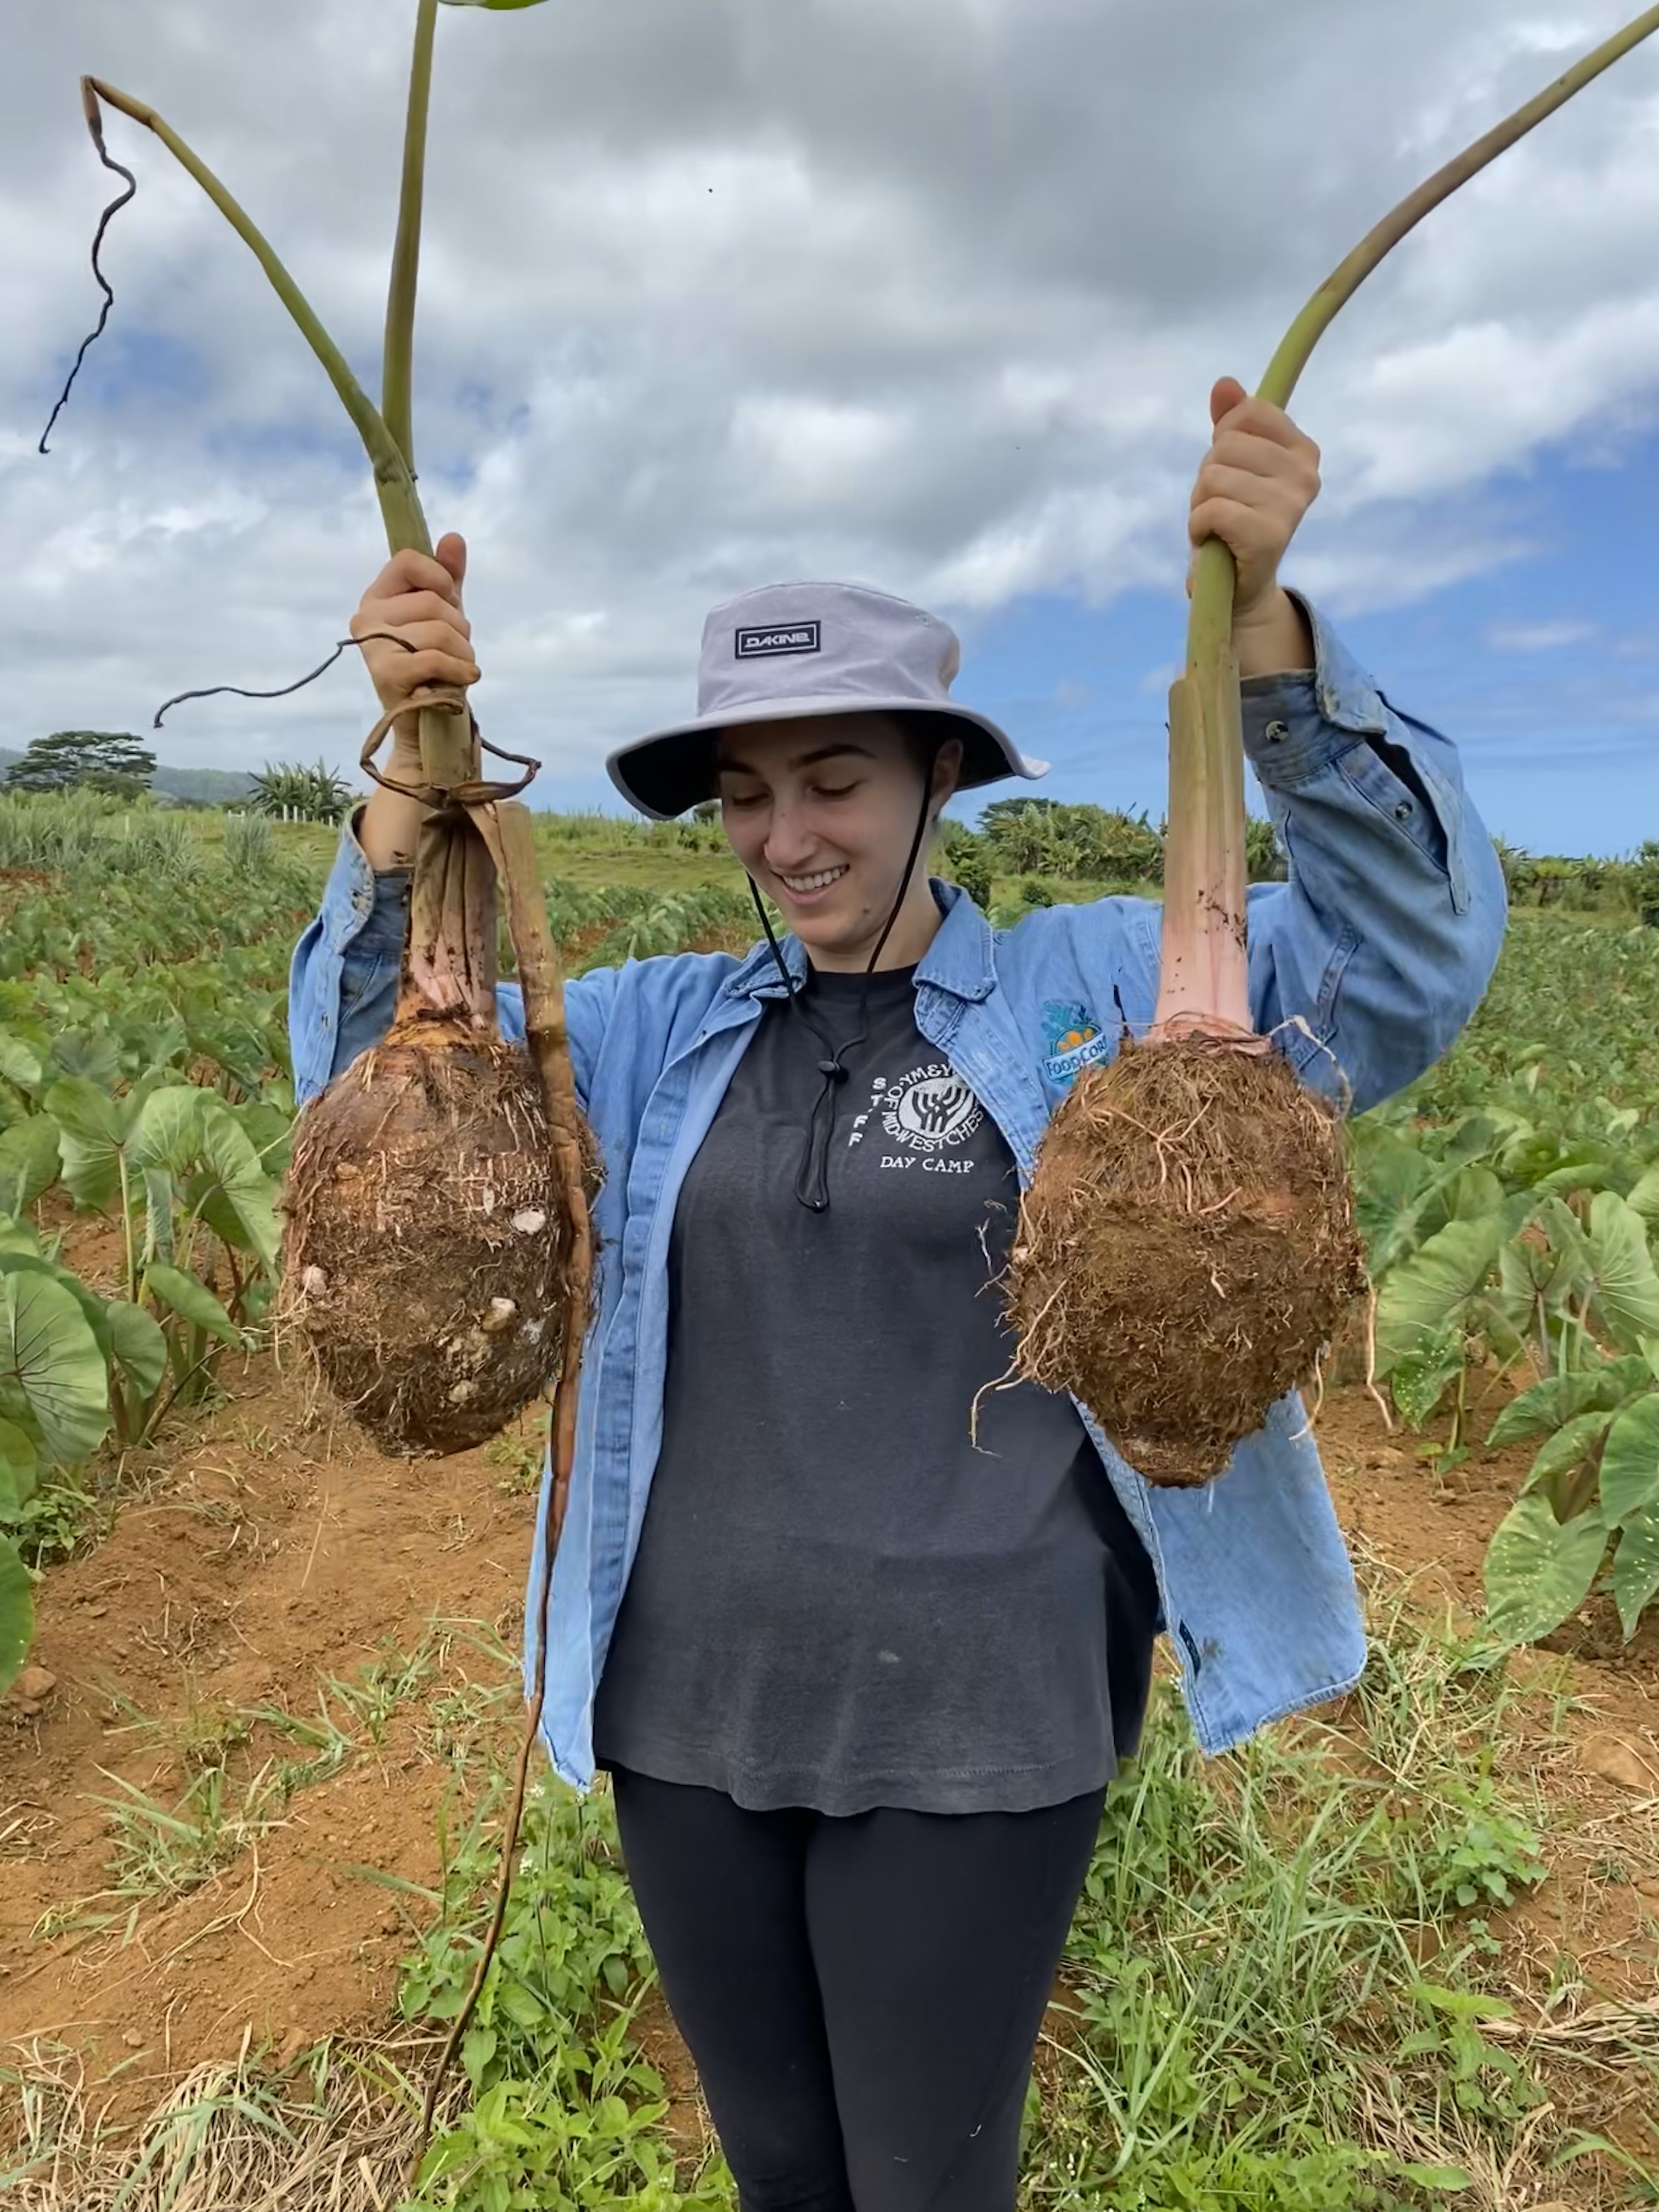 Anna stands on a farm holding two giant Kalo